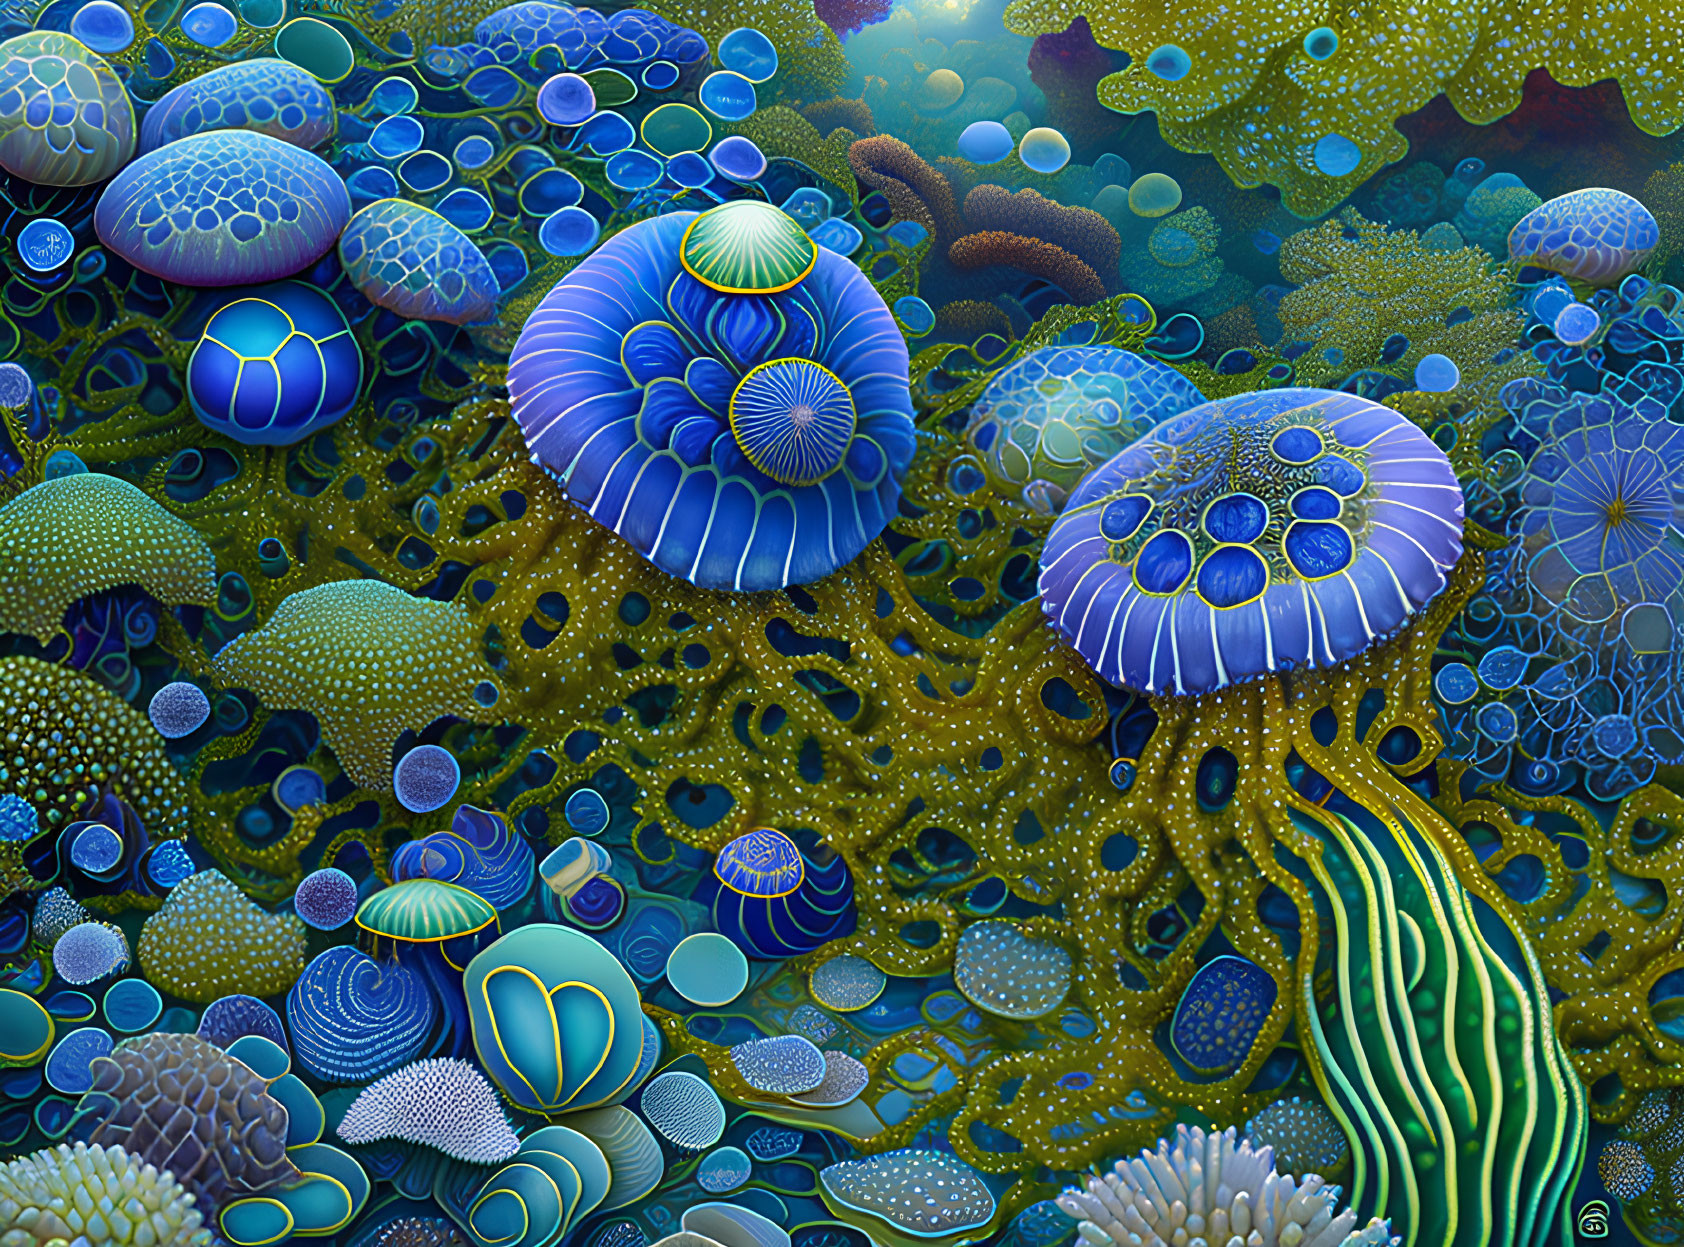 Colorful Digital Art: Underwater Scene with Coral and Sea Anemones